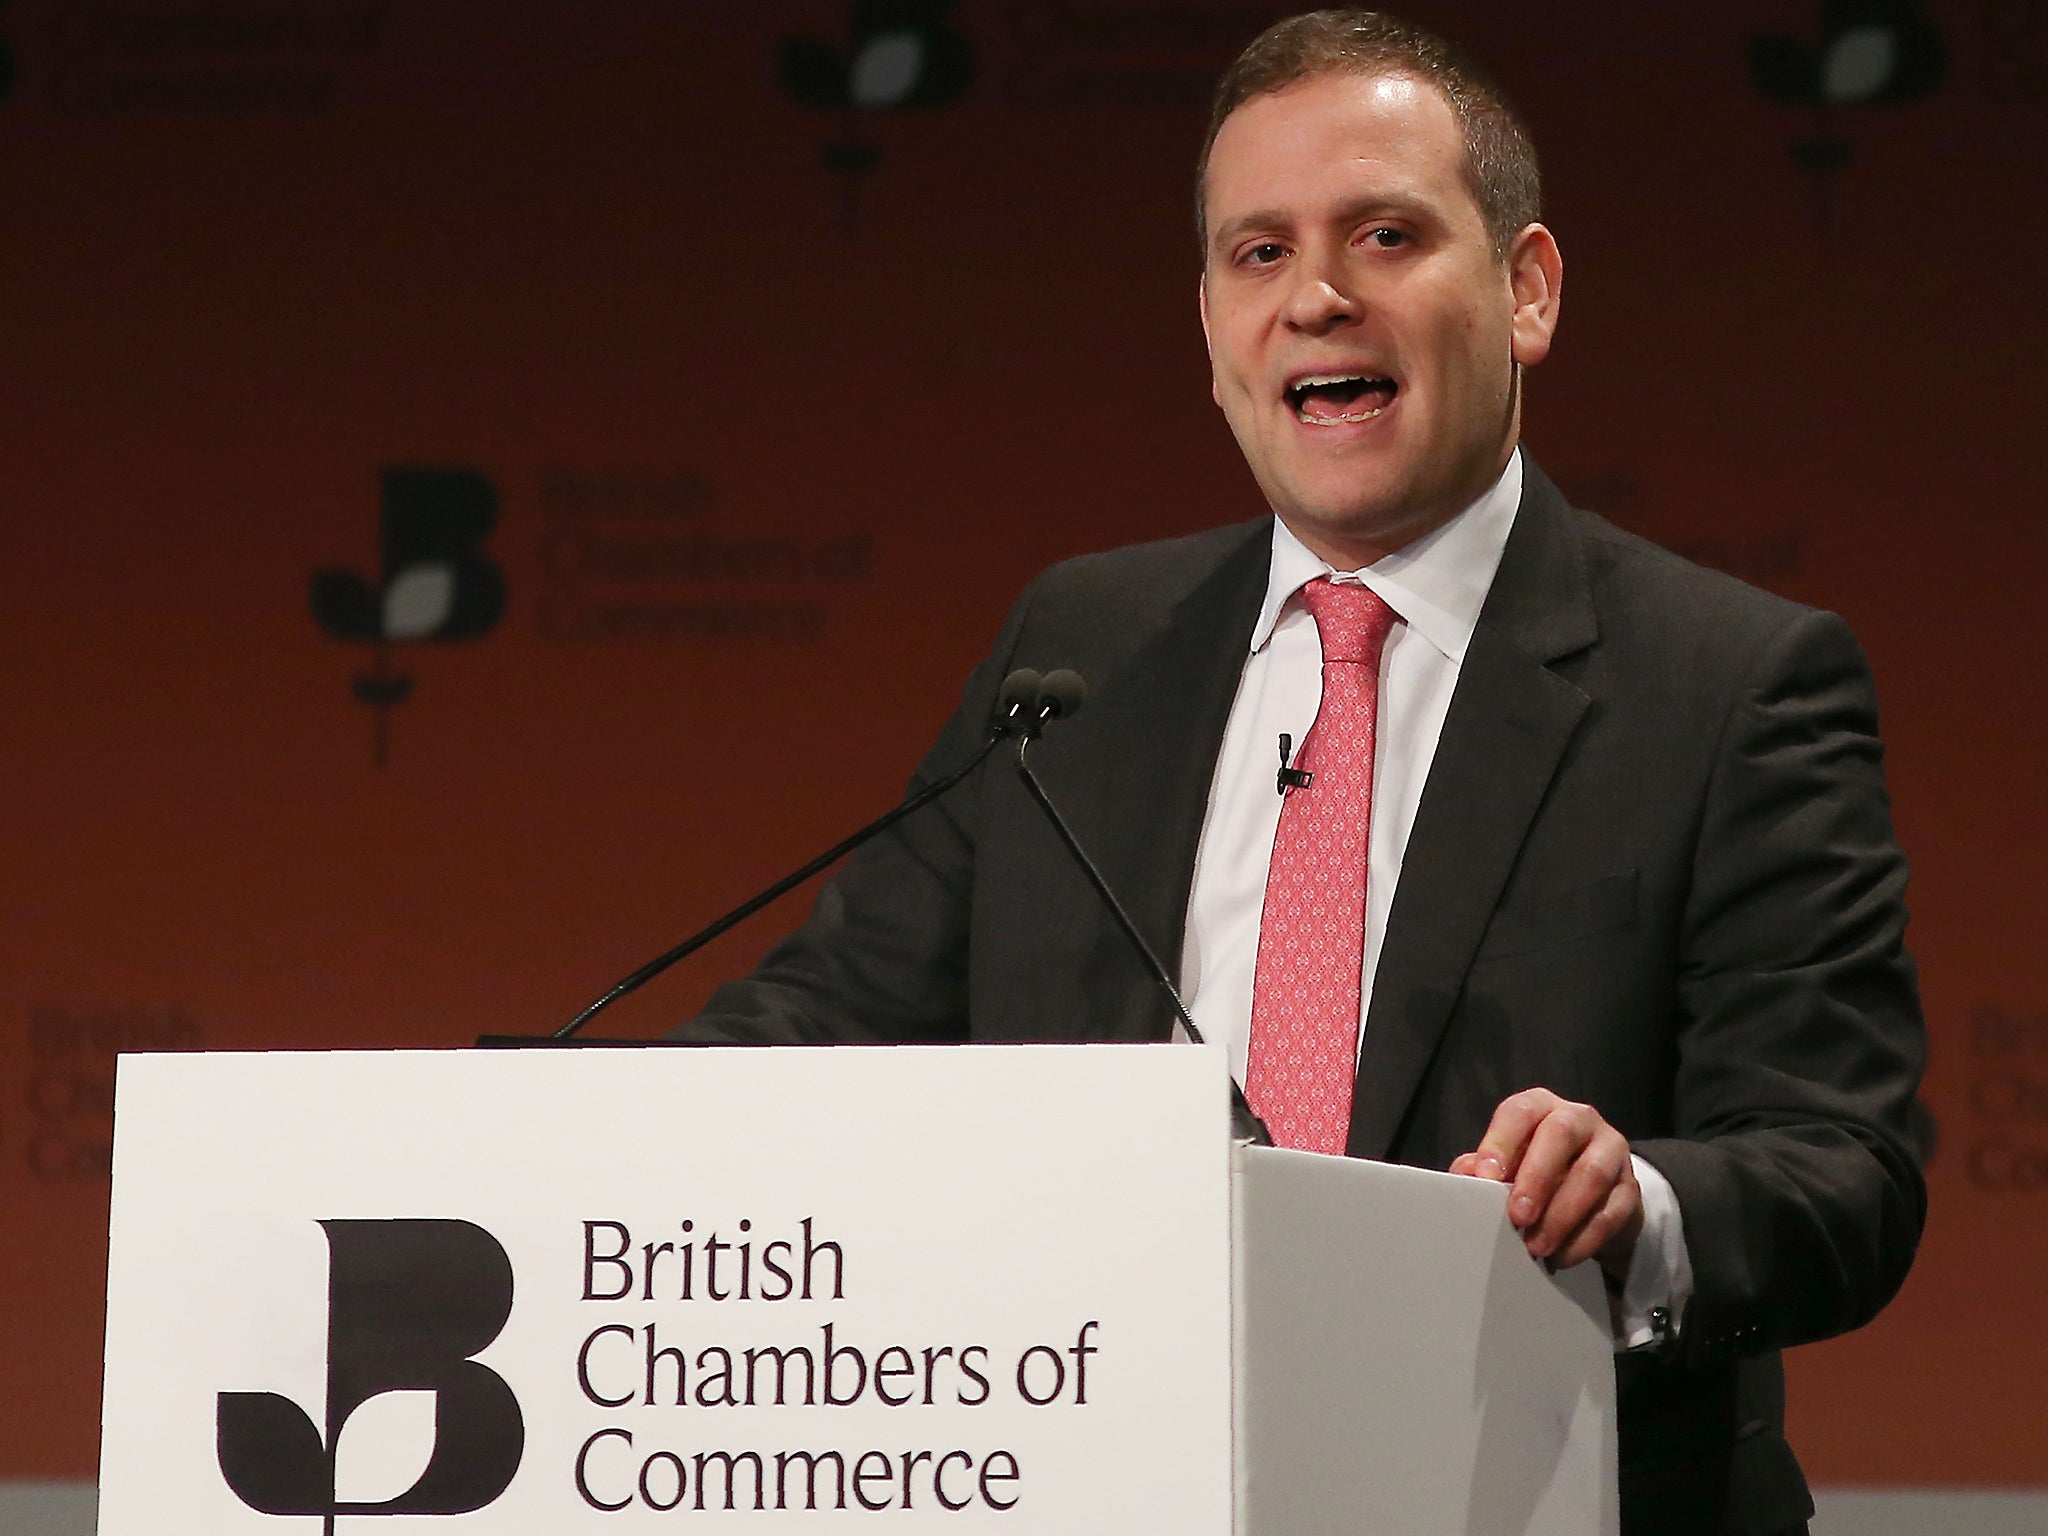 The BCC has been a vocal proponent of reforming the business rates system and providing stable infrastructure and a sustainable industrial strategy as the UK prepares to leave the EU